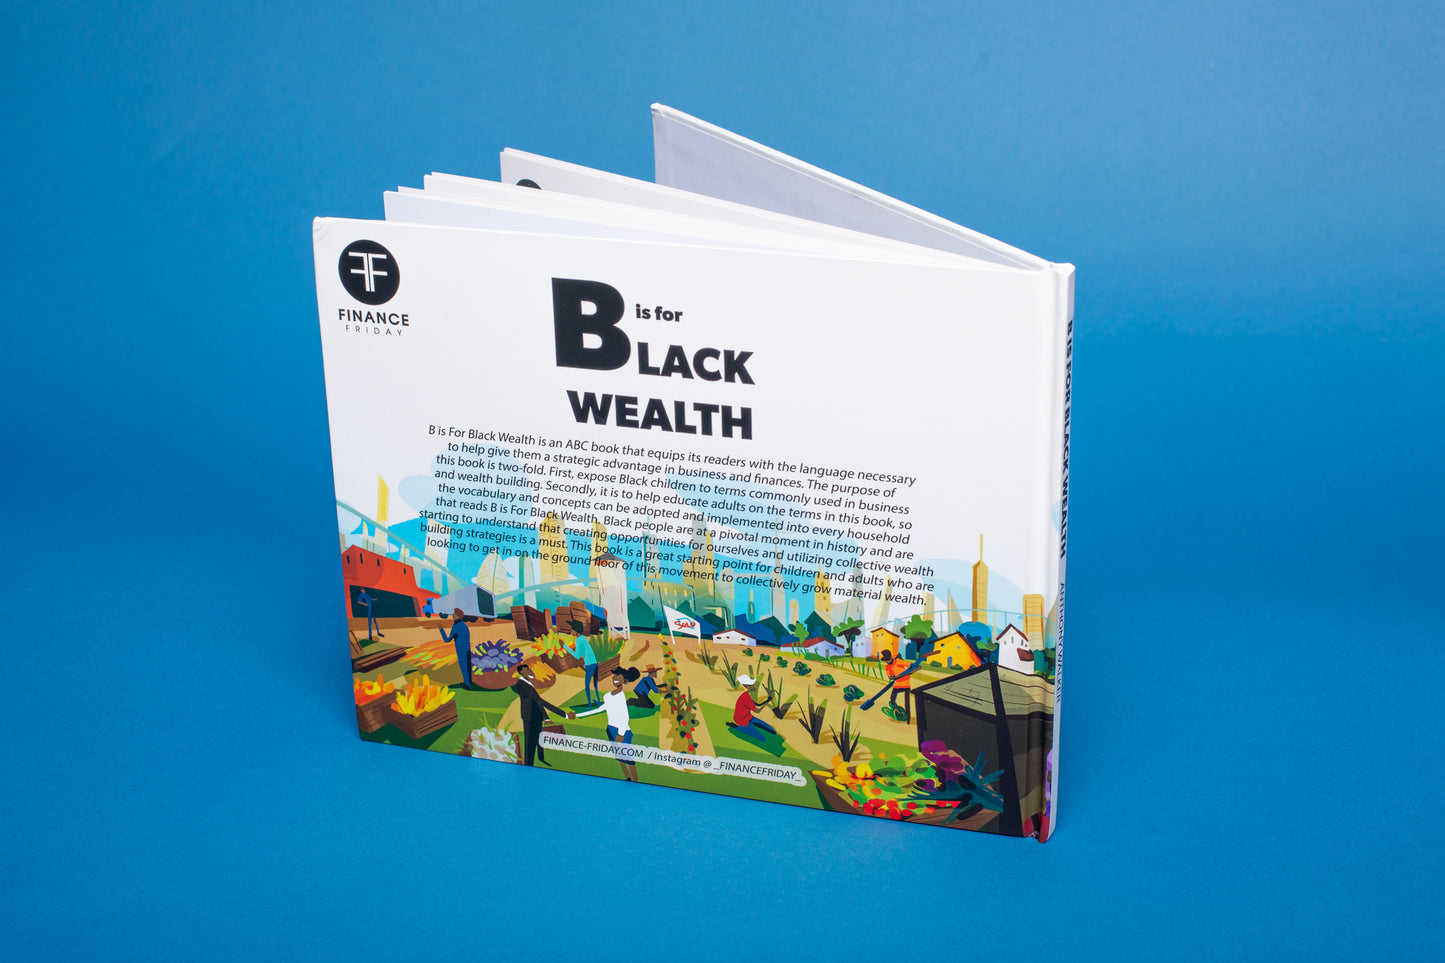 "B" is for Black Wealth